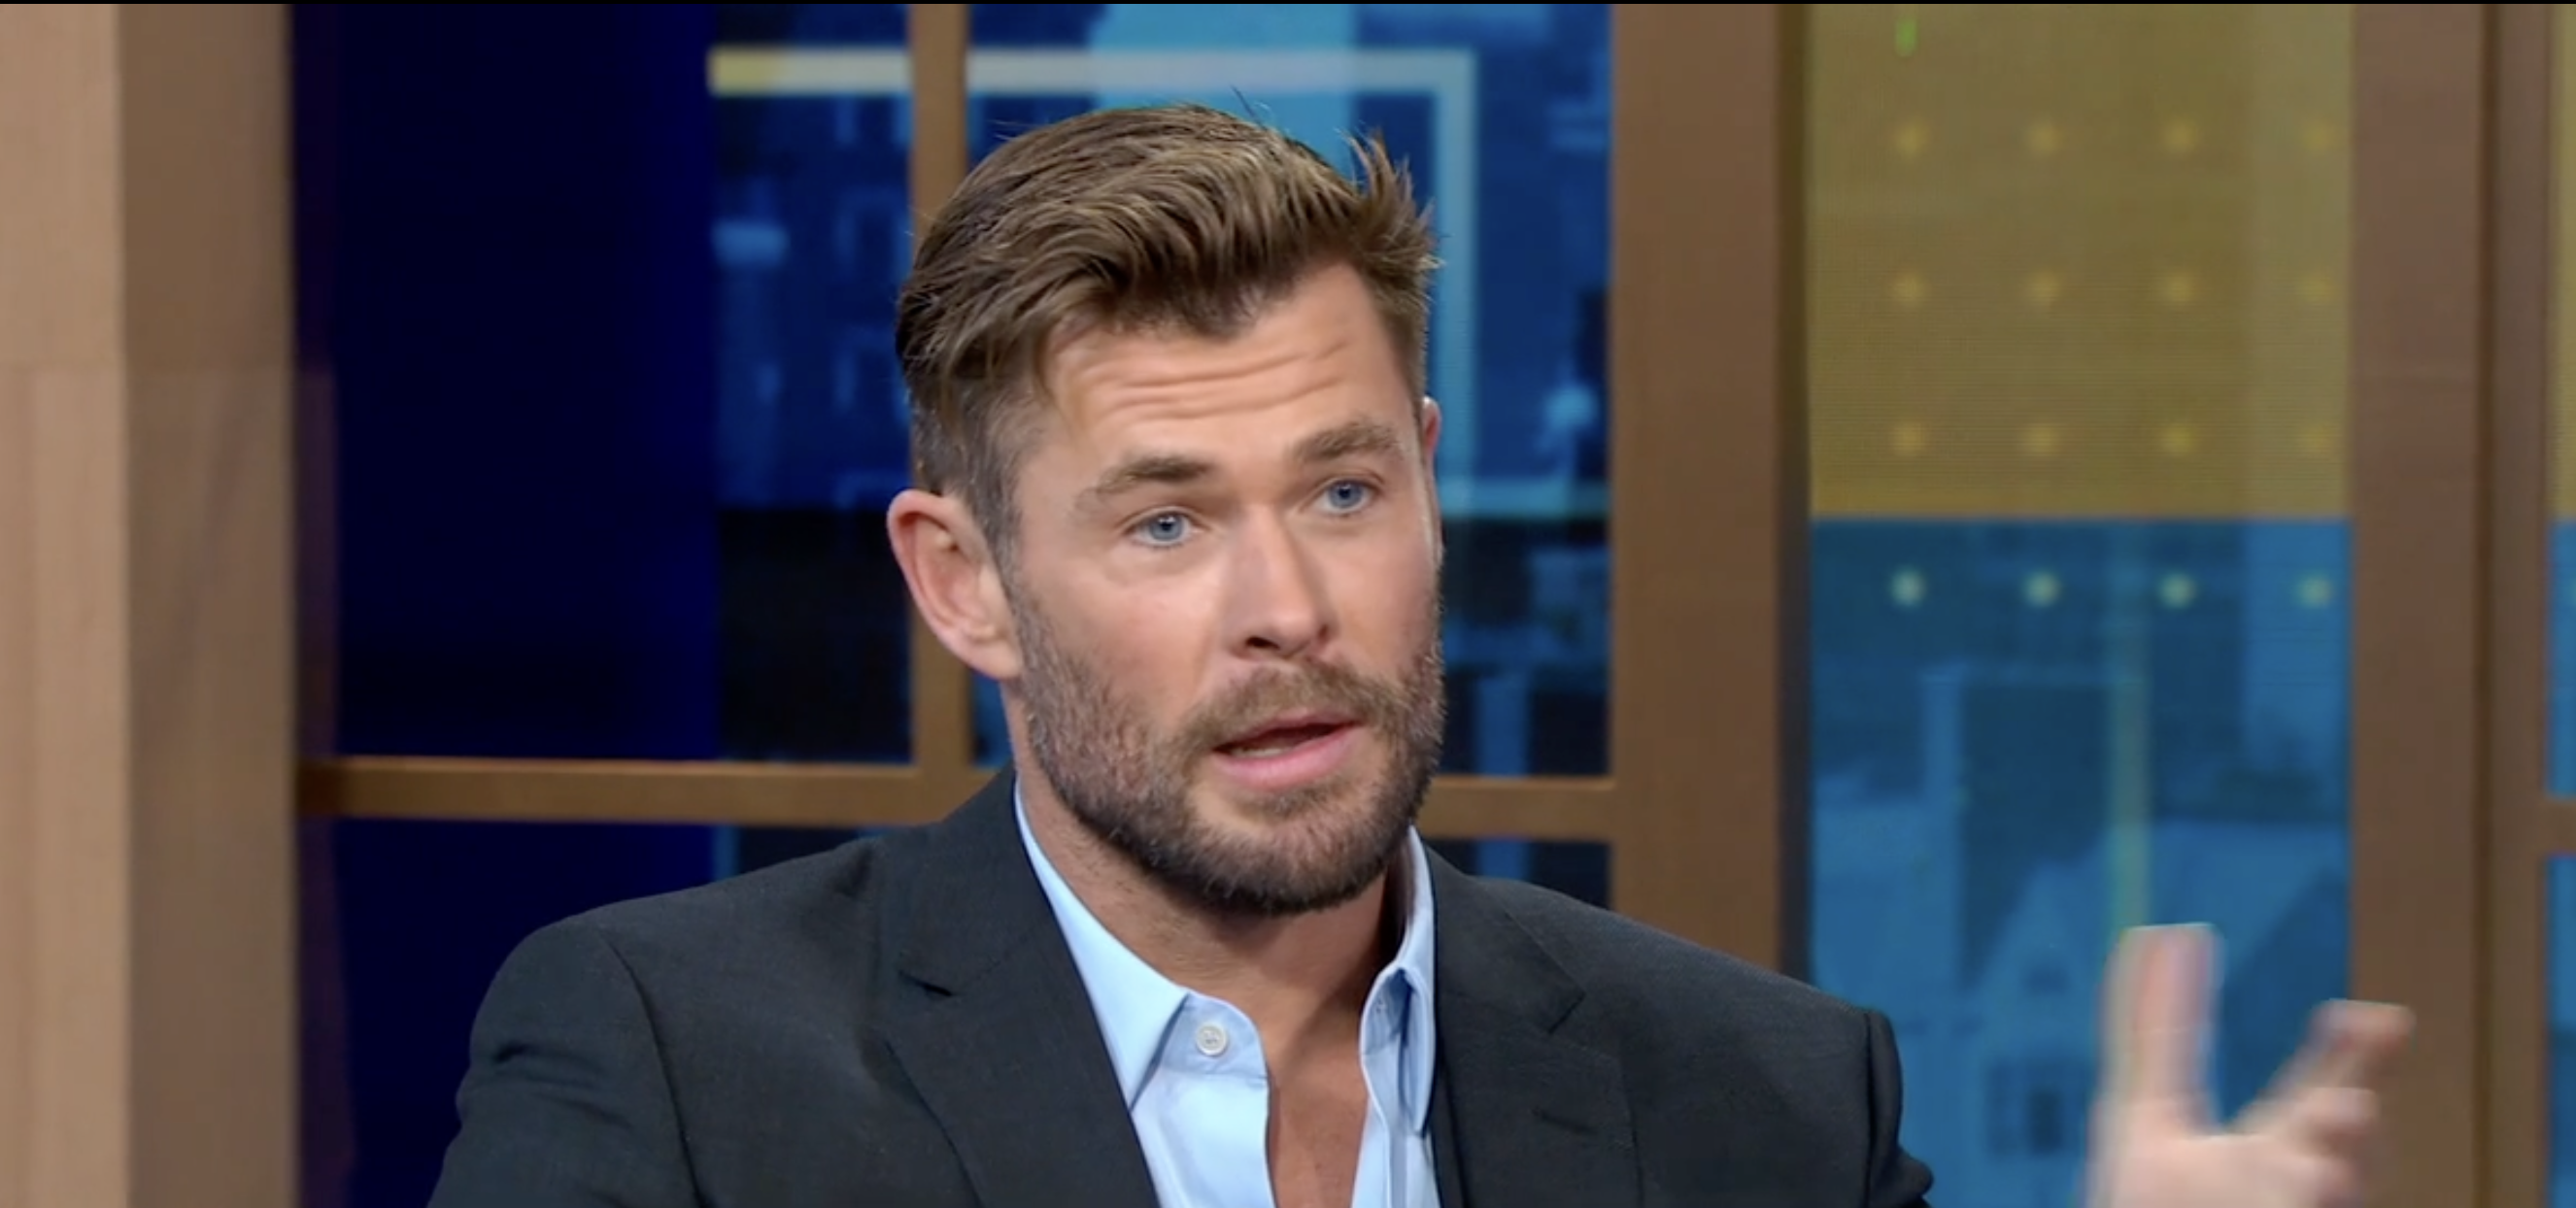 Chris Hemsworth Opens Up On ‘Retiring From Hollywood’ After Alzheimer’s News